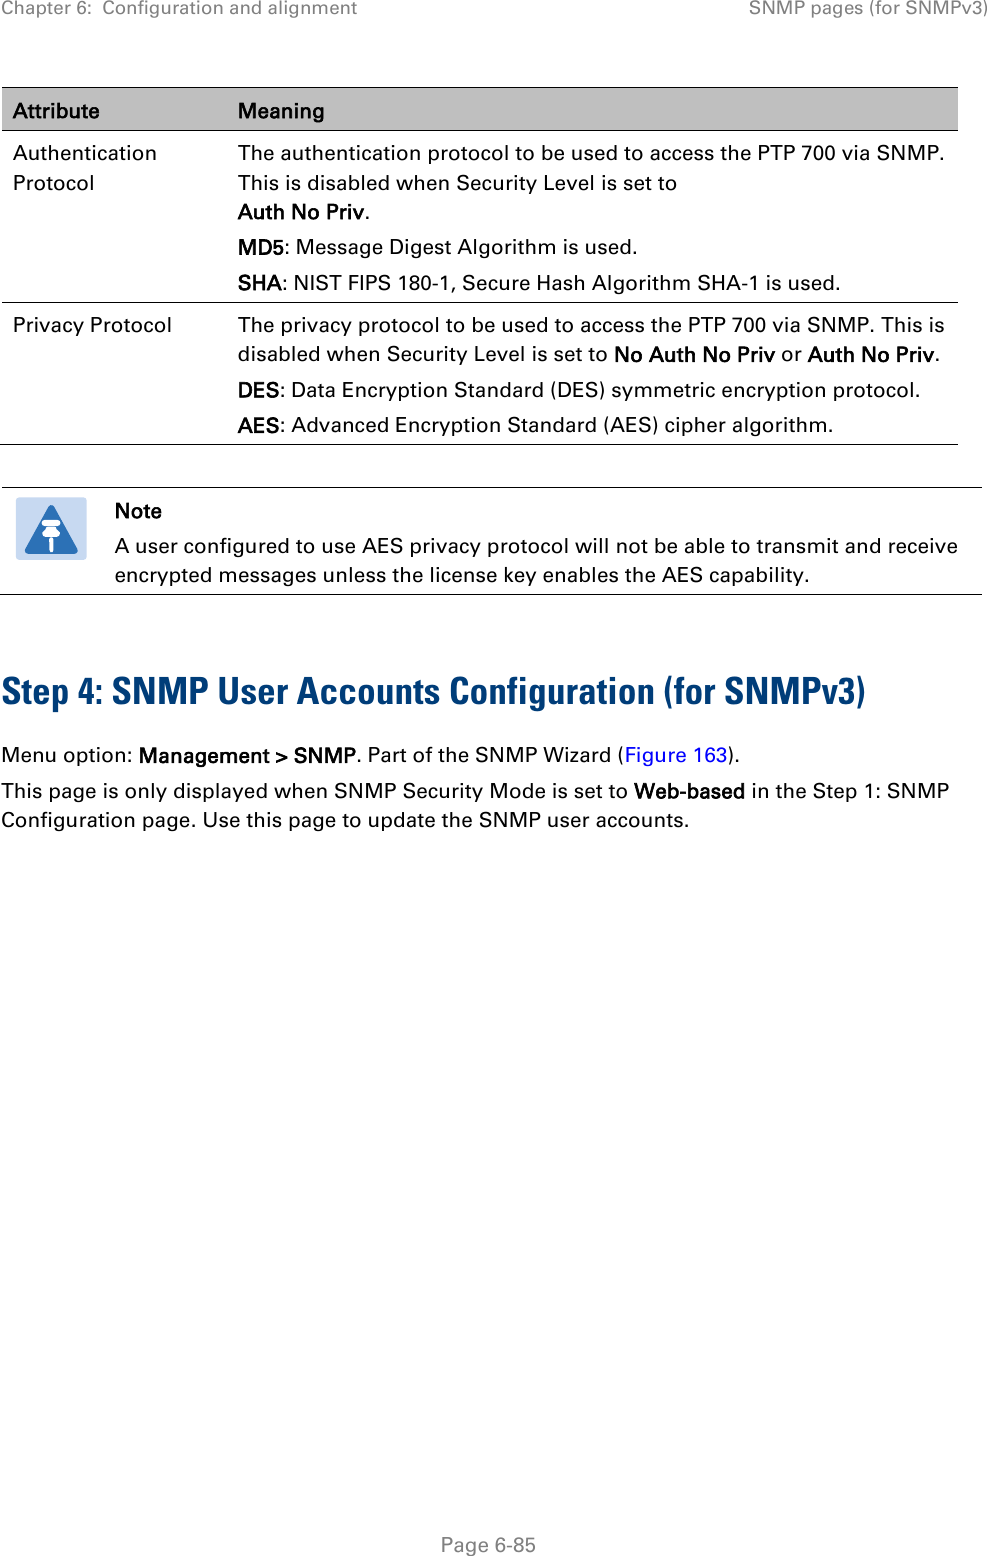 Chapter 6:  Configuration and alignment SNMP pages (for SNMPv3)  Attribute Meaning Authentication Protocol The authentication protocol to be used to access the PTP 700 via SNMP. This is disabled when Security Level is set to Auth No Priv. MD5: Message Digest Algorithm is used. SHA: NIST FIPS 180-1, Secure Hash Algorithm SHA-1 is used. Privacy Protocol The privacy protocol to be used to access the PTP 700 via SNMP. This is disabled when Security Level is set to No Auth No Priv or Auth No Priv. DES: Data Encryption Standard (DES) symmetric encryption protocol. AES: Advanced Encryption Standard (AES) cipher algorithm.    Note A user configured to use AES privacy protocol will not be able to transmit and receive encrypted messages unless the license key enables the AES capability.  Step 4: SNMP User Accounts Configuration (for SNMPv3) Menu option: Management &gt; SNMP. Part of the SNMP Wizard (Figure 163). This page is only displayed when SNMP Security Mode is set to Web-based in the Step 1: SNMP Configuration page. Use this page to update the SNMP user accounts.  Page 6-85 